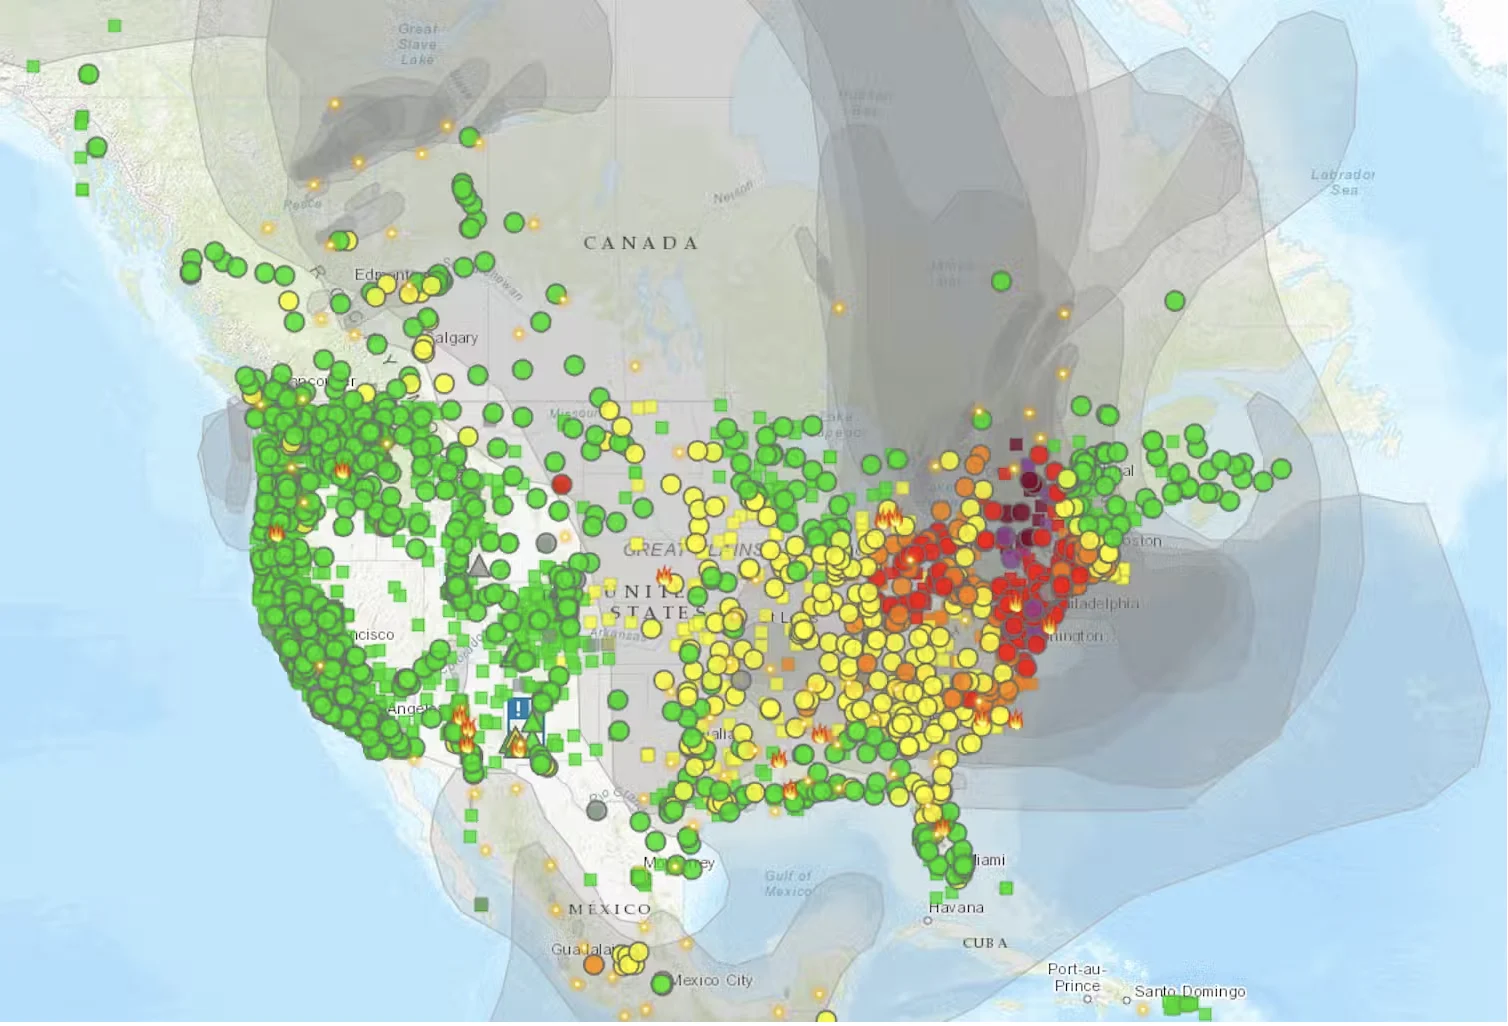 AirNow.gov: Smoke from wildfires in Canada was detected across a large part of the U.S. on June 7, 2023. Dark purple dots indicate hazardous air quality. Light purple indicates very unhealthy air; red is unhealthy; orange is unhealthy for sensitive groups; and yellow indicates moderate risk. AirNow.gov